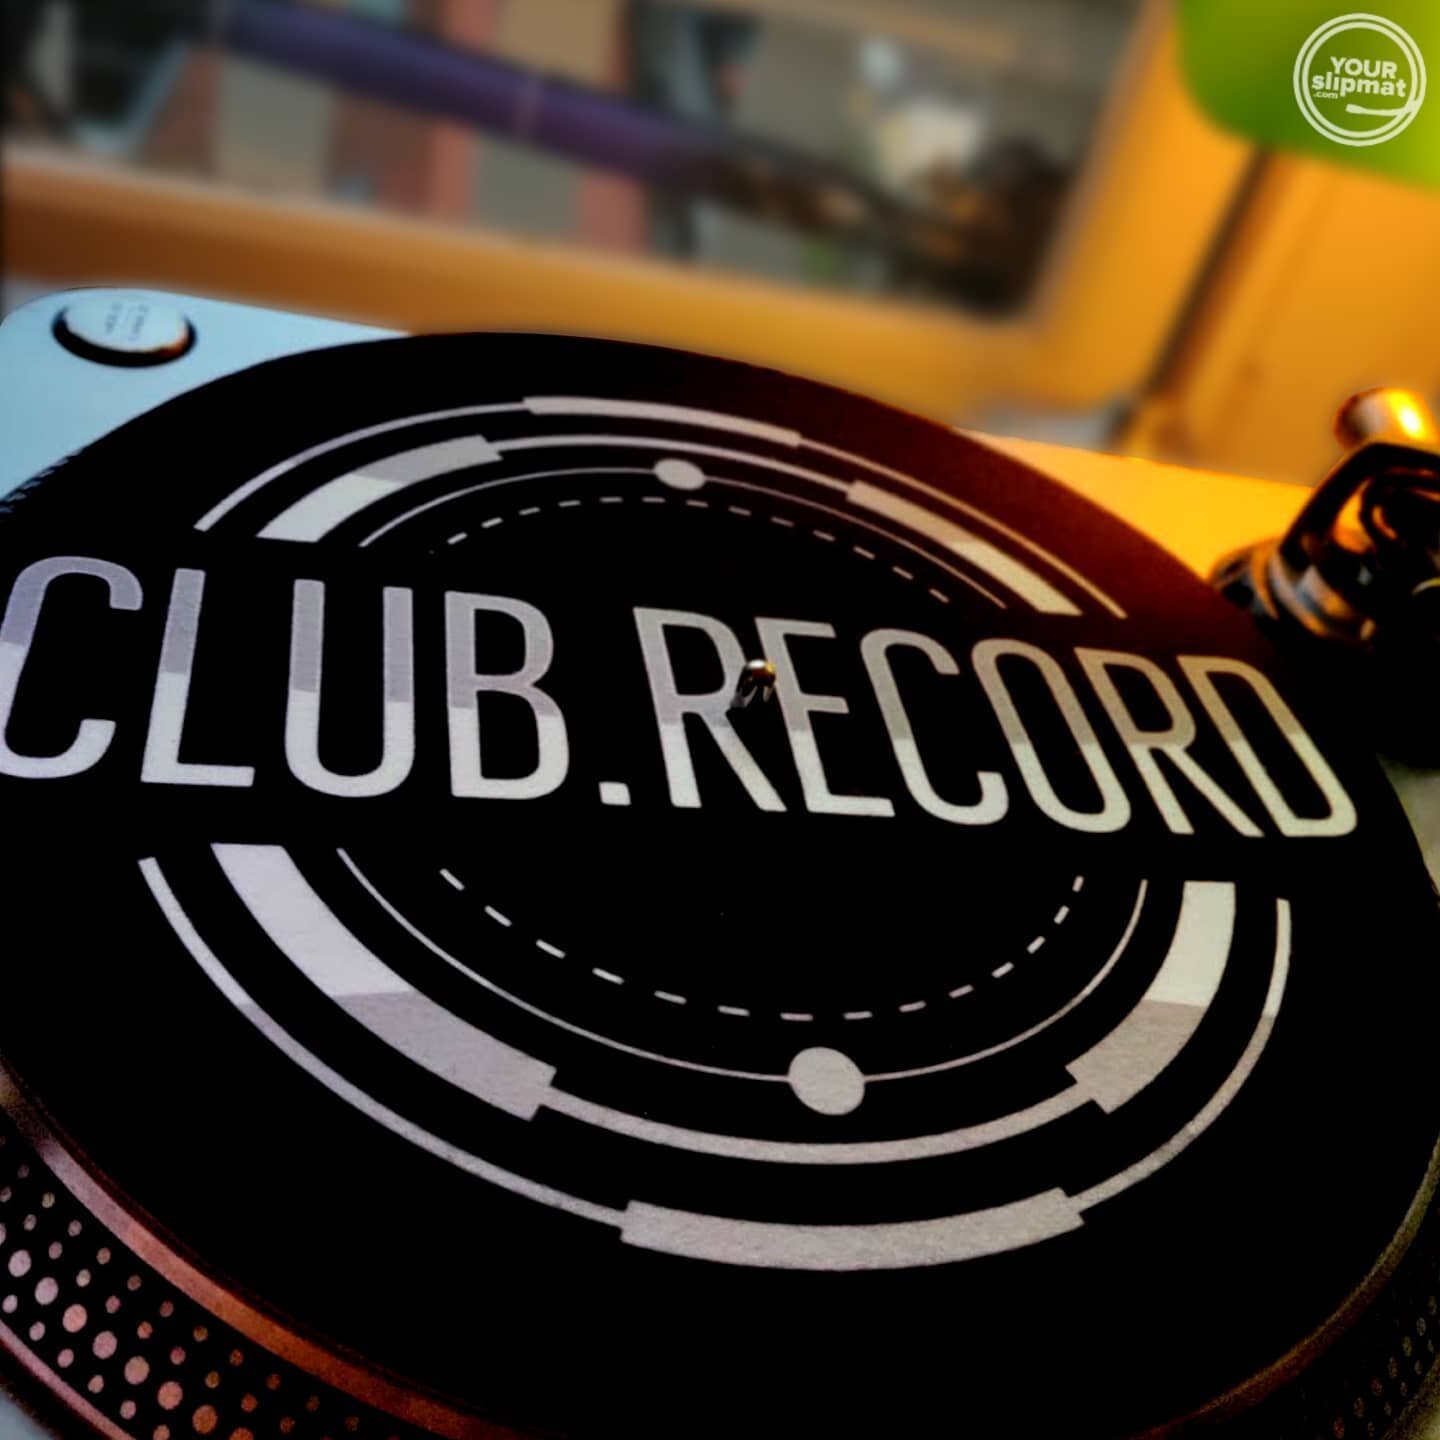 Club.Record slipmats 4 the win now! Visit @club.record instagram to find the details and maybe you will have a stunning limited Club.Record on YOUR turntable soonishh✌️!
#clubrecord #customslipmat #yourslipmat #slipmat #12inch #DJ #technics